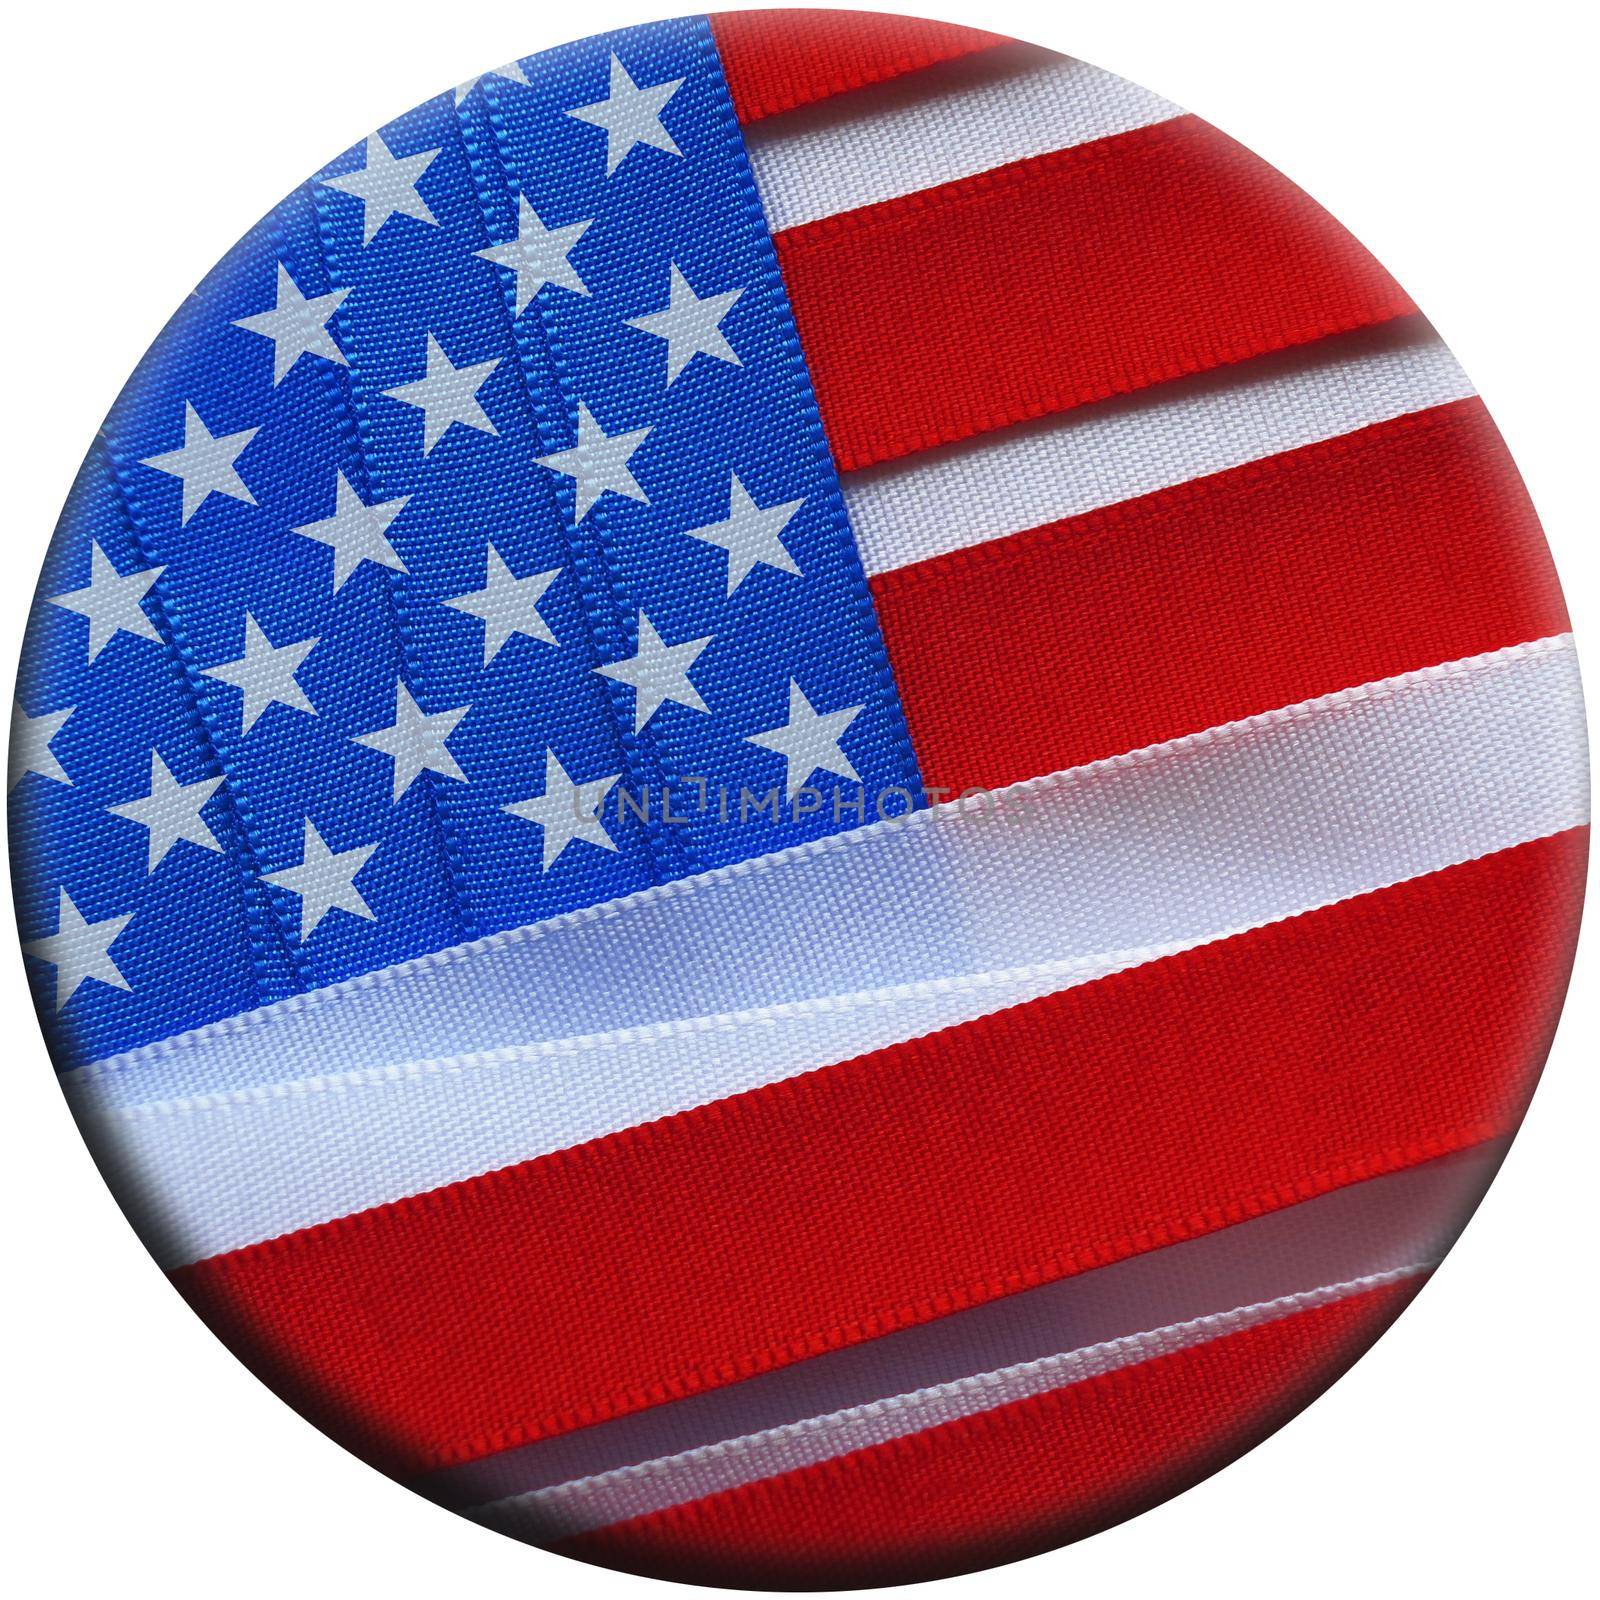 United States of America flag or banner by aroas